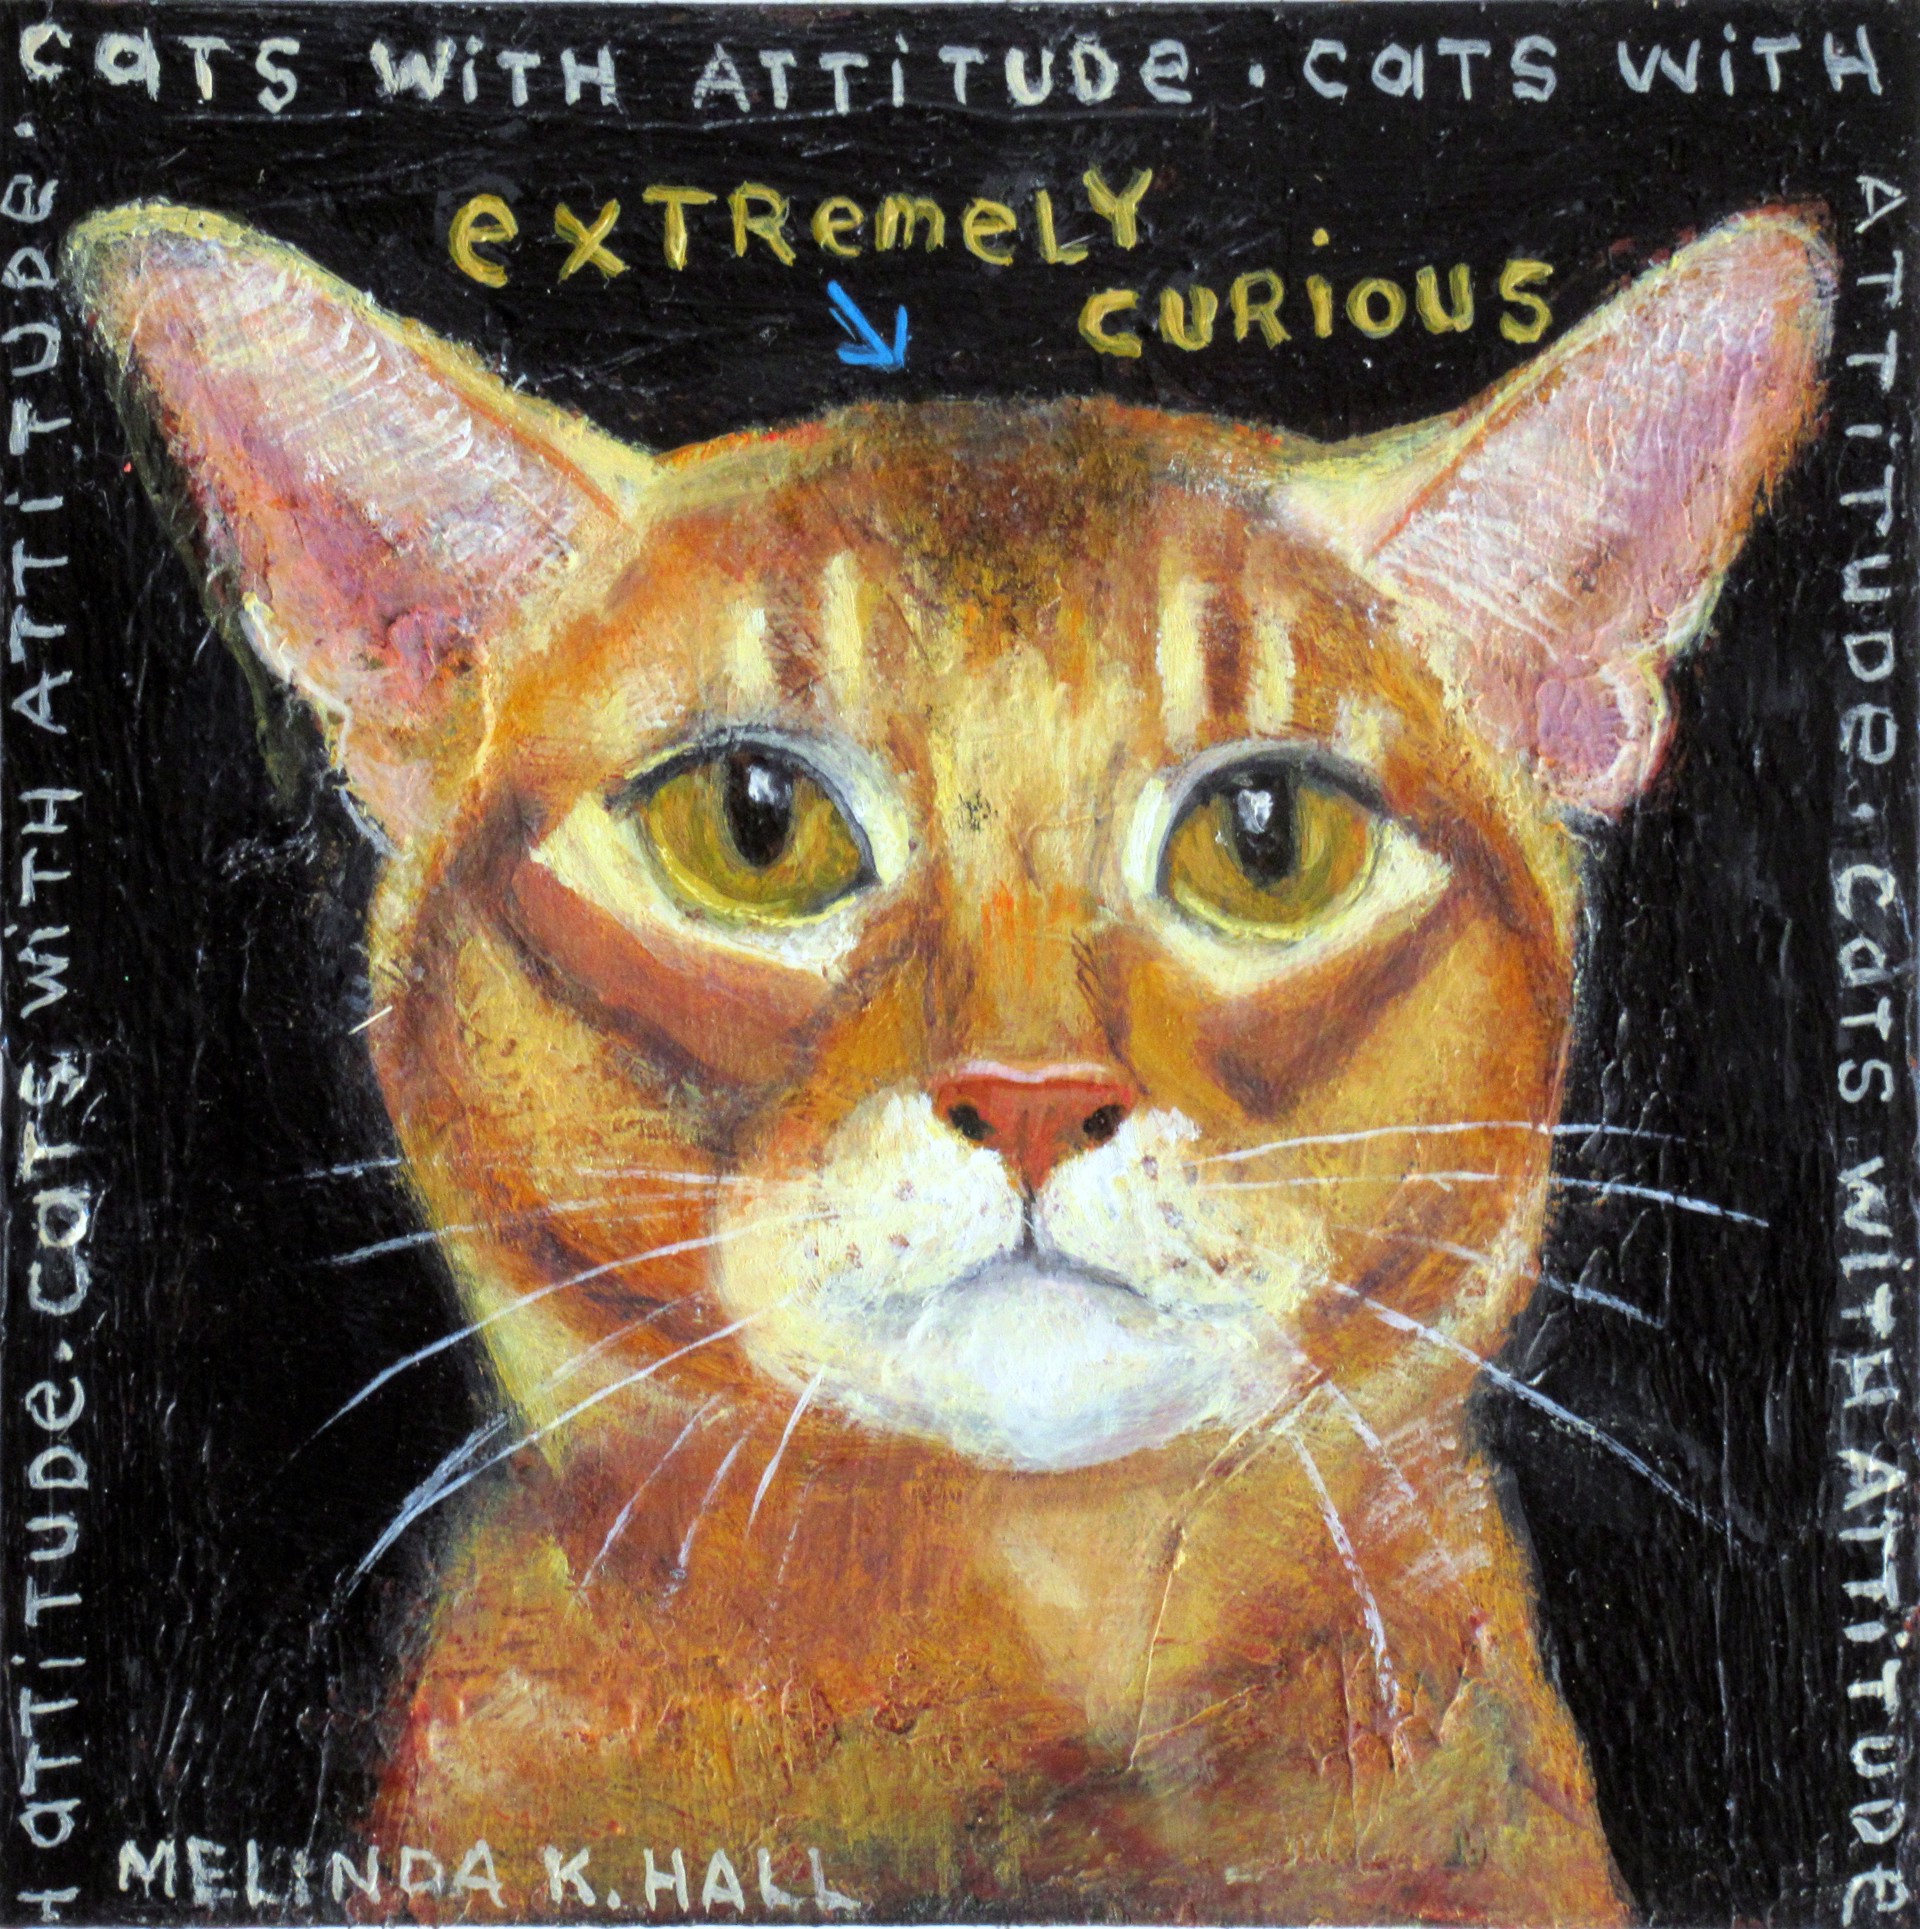 Cats With Attitude:  Extremely Curious by Melinda K. Hall